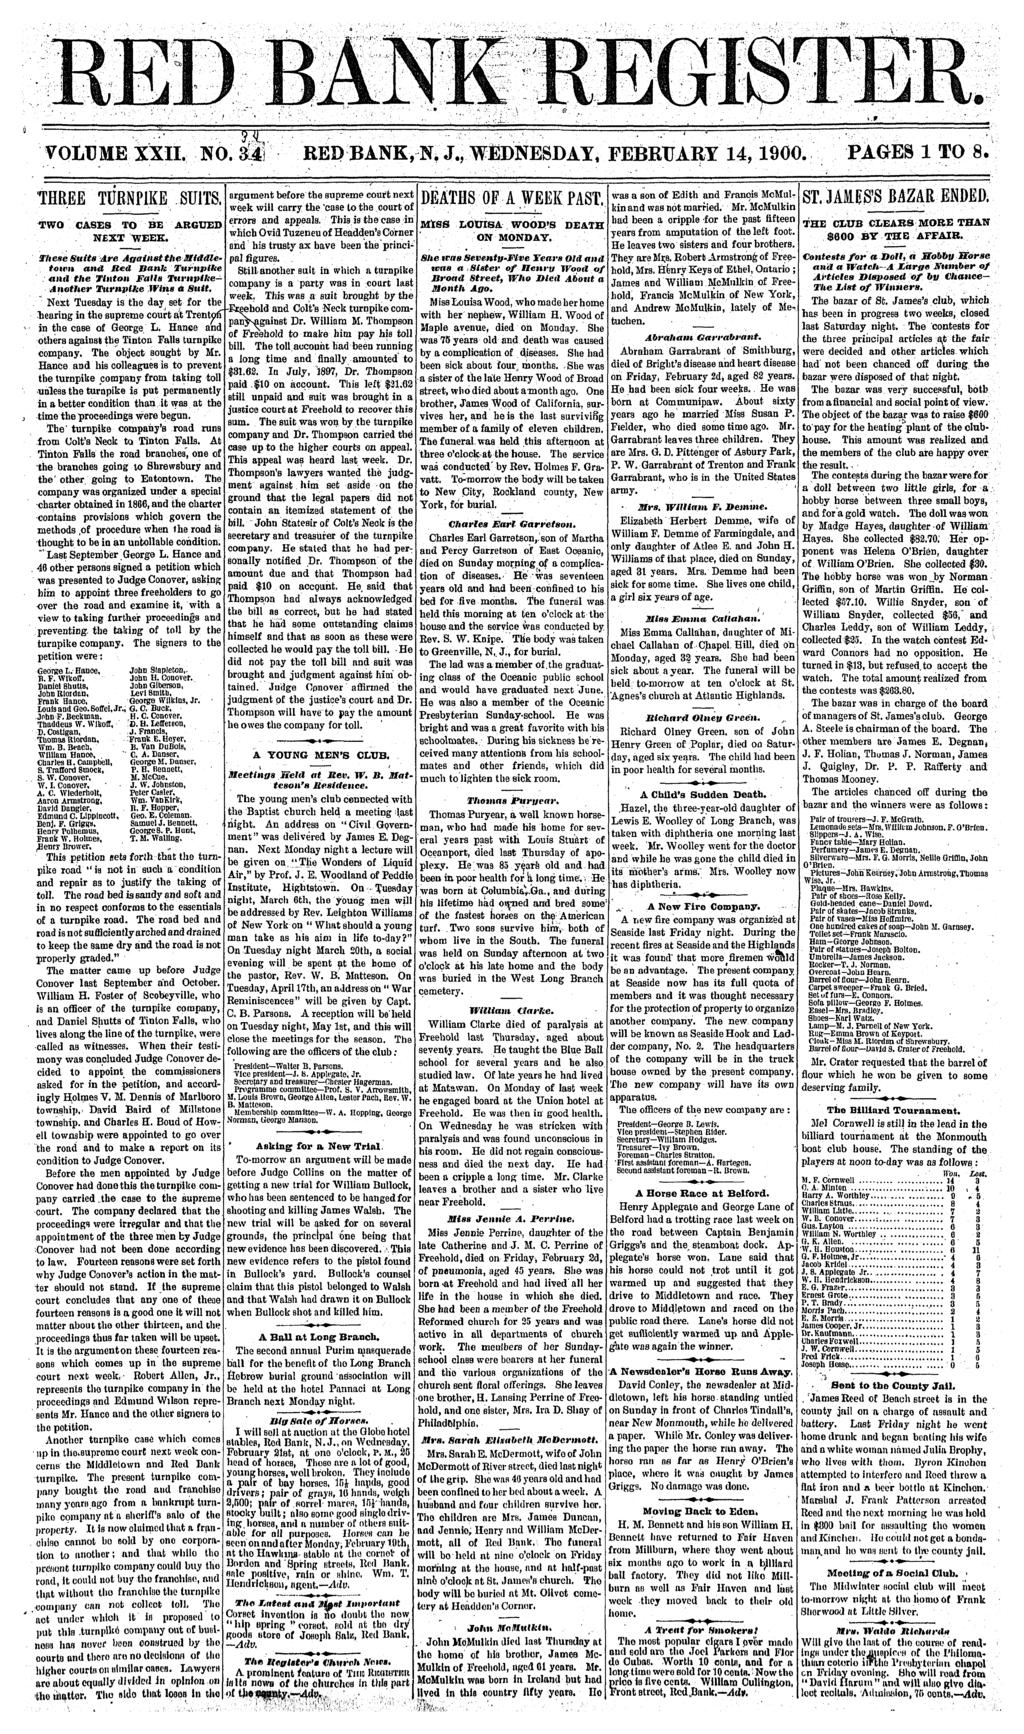 VOLUME XX, NO. 34' RED BANK,-N, J., WEDNESDA, FEBRUAR 14, 1900. PAGES 1 O 8. HREE URNPKE SUS. WO CASES O BE ARGUED NEX WEEK.